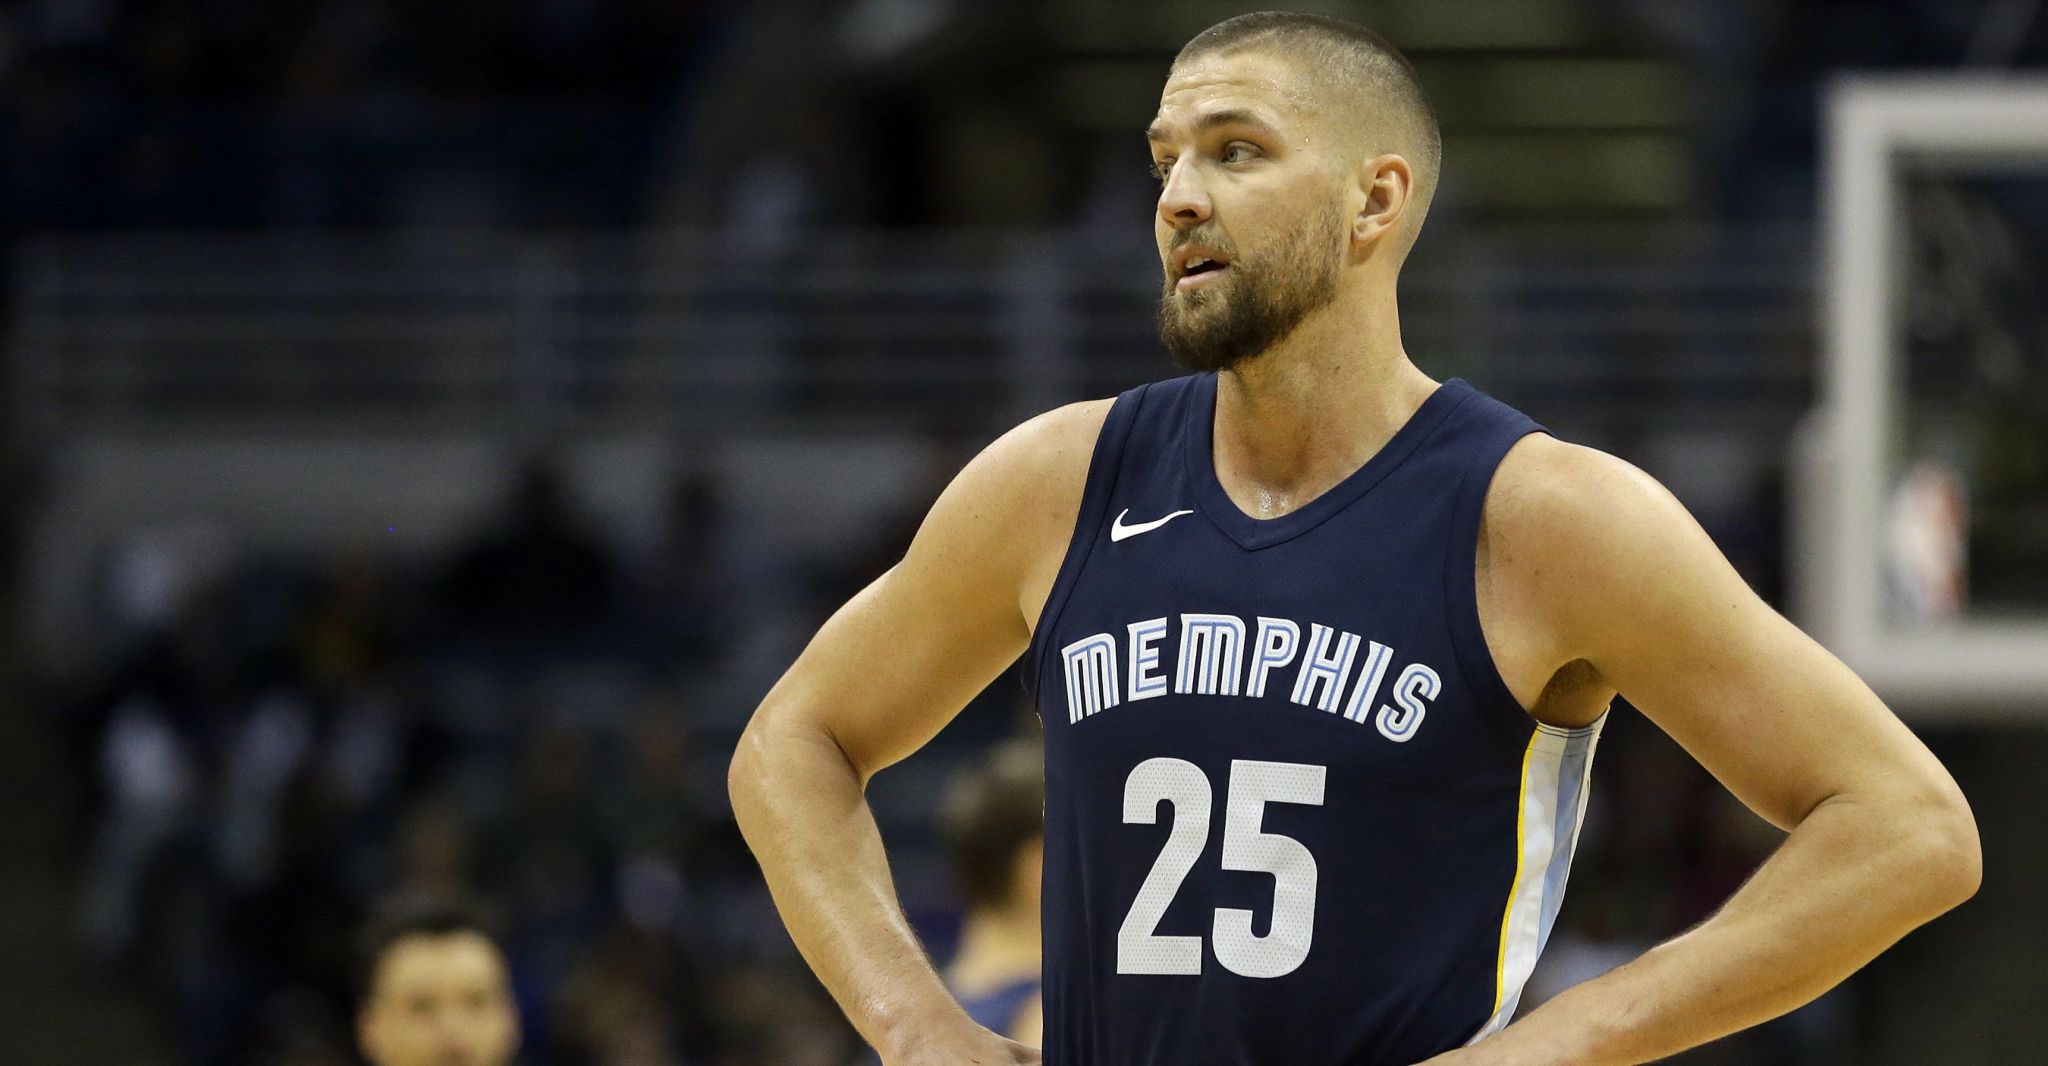 Grizzlies' Chandler Parsons starts against Rockets - Houston Chronicle2048 x 1066